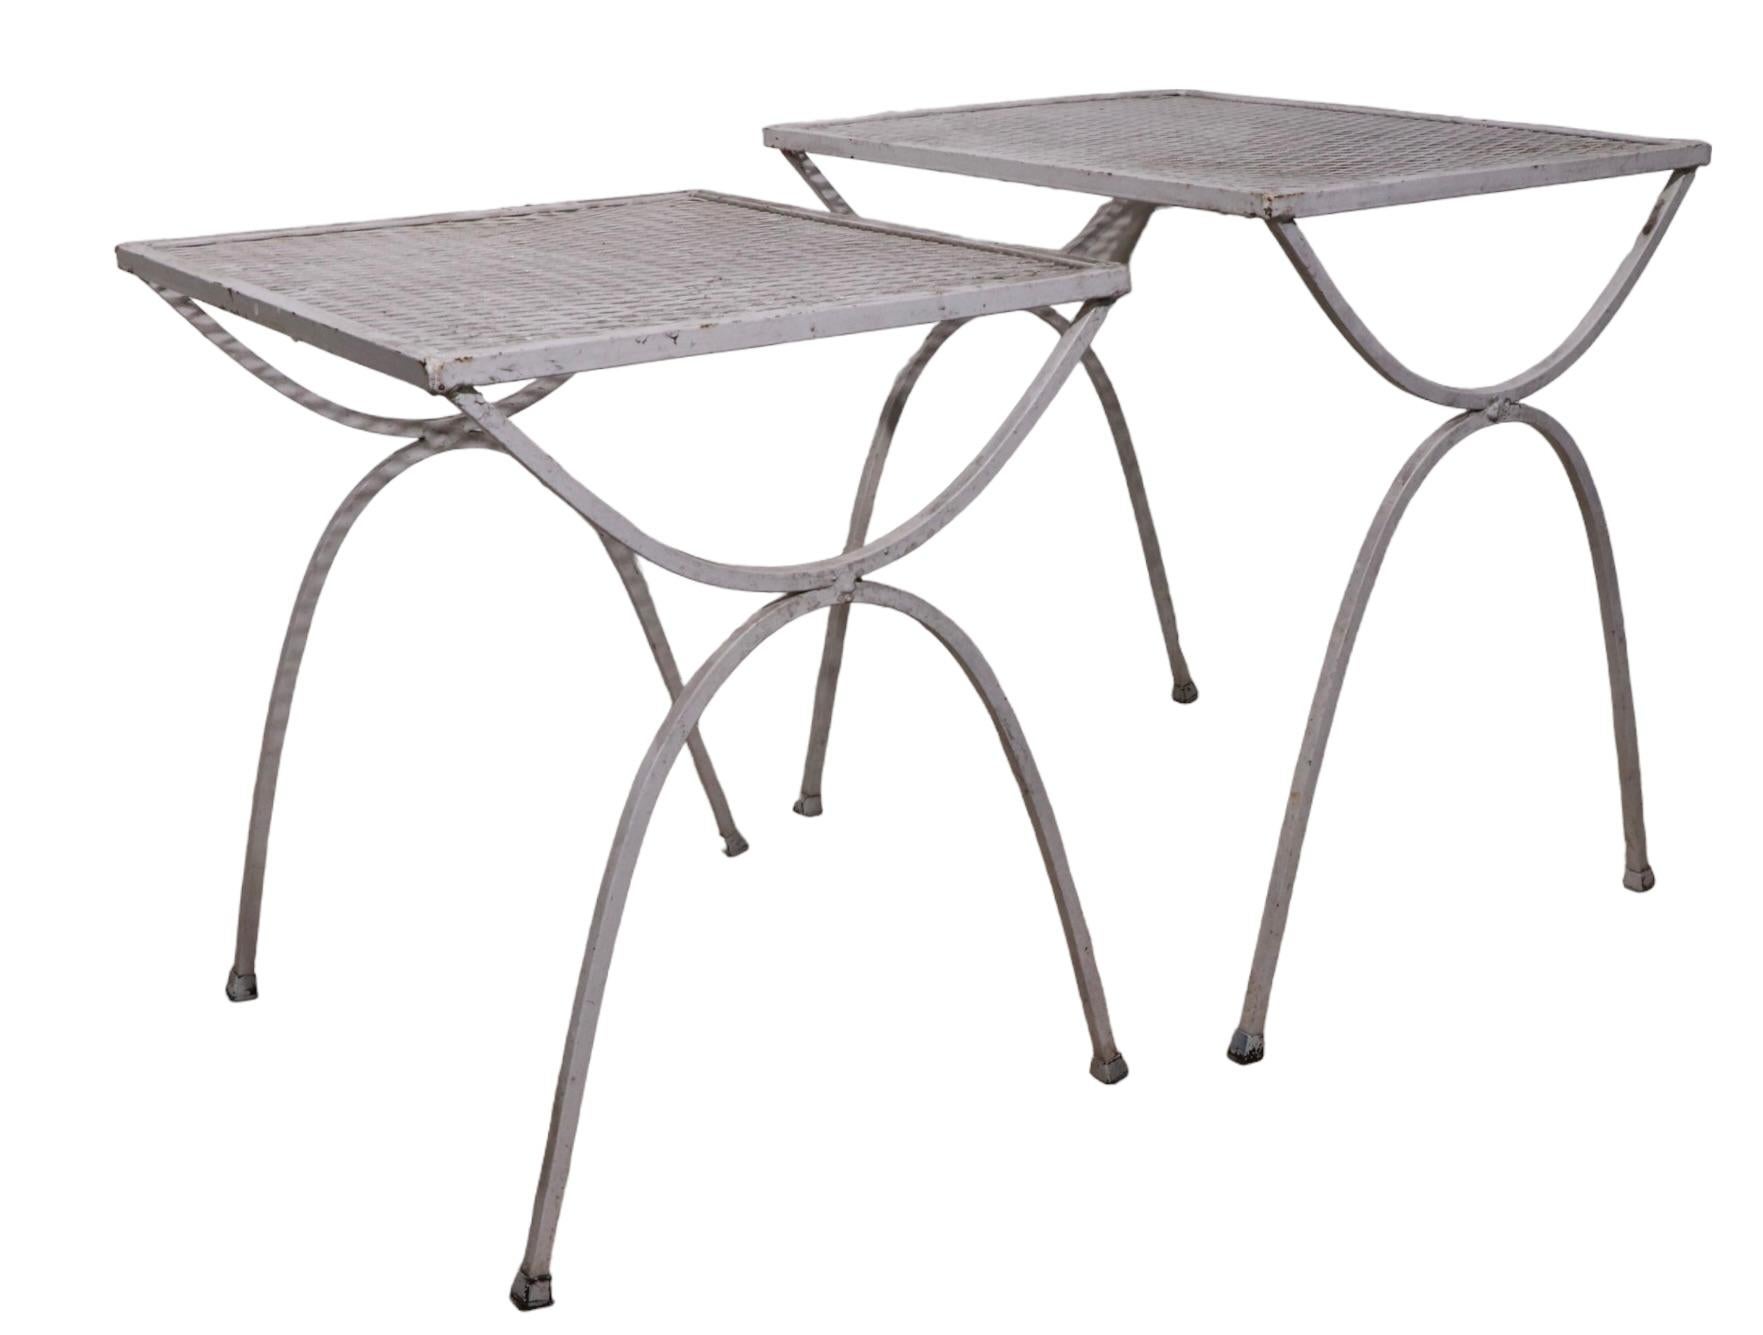 Two Piece Garden Patio Poolside Nesting Tables by Salterini 2 Sets Available In Good Condition For Sale In New York, NY